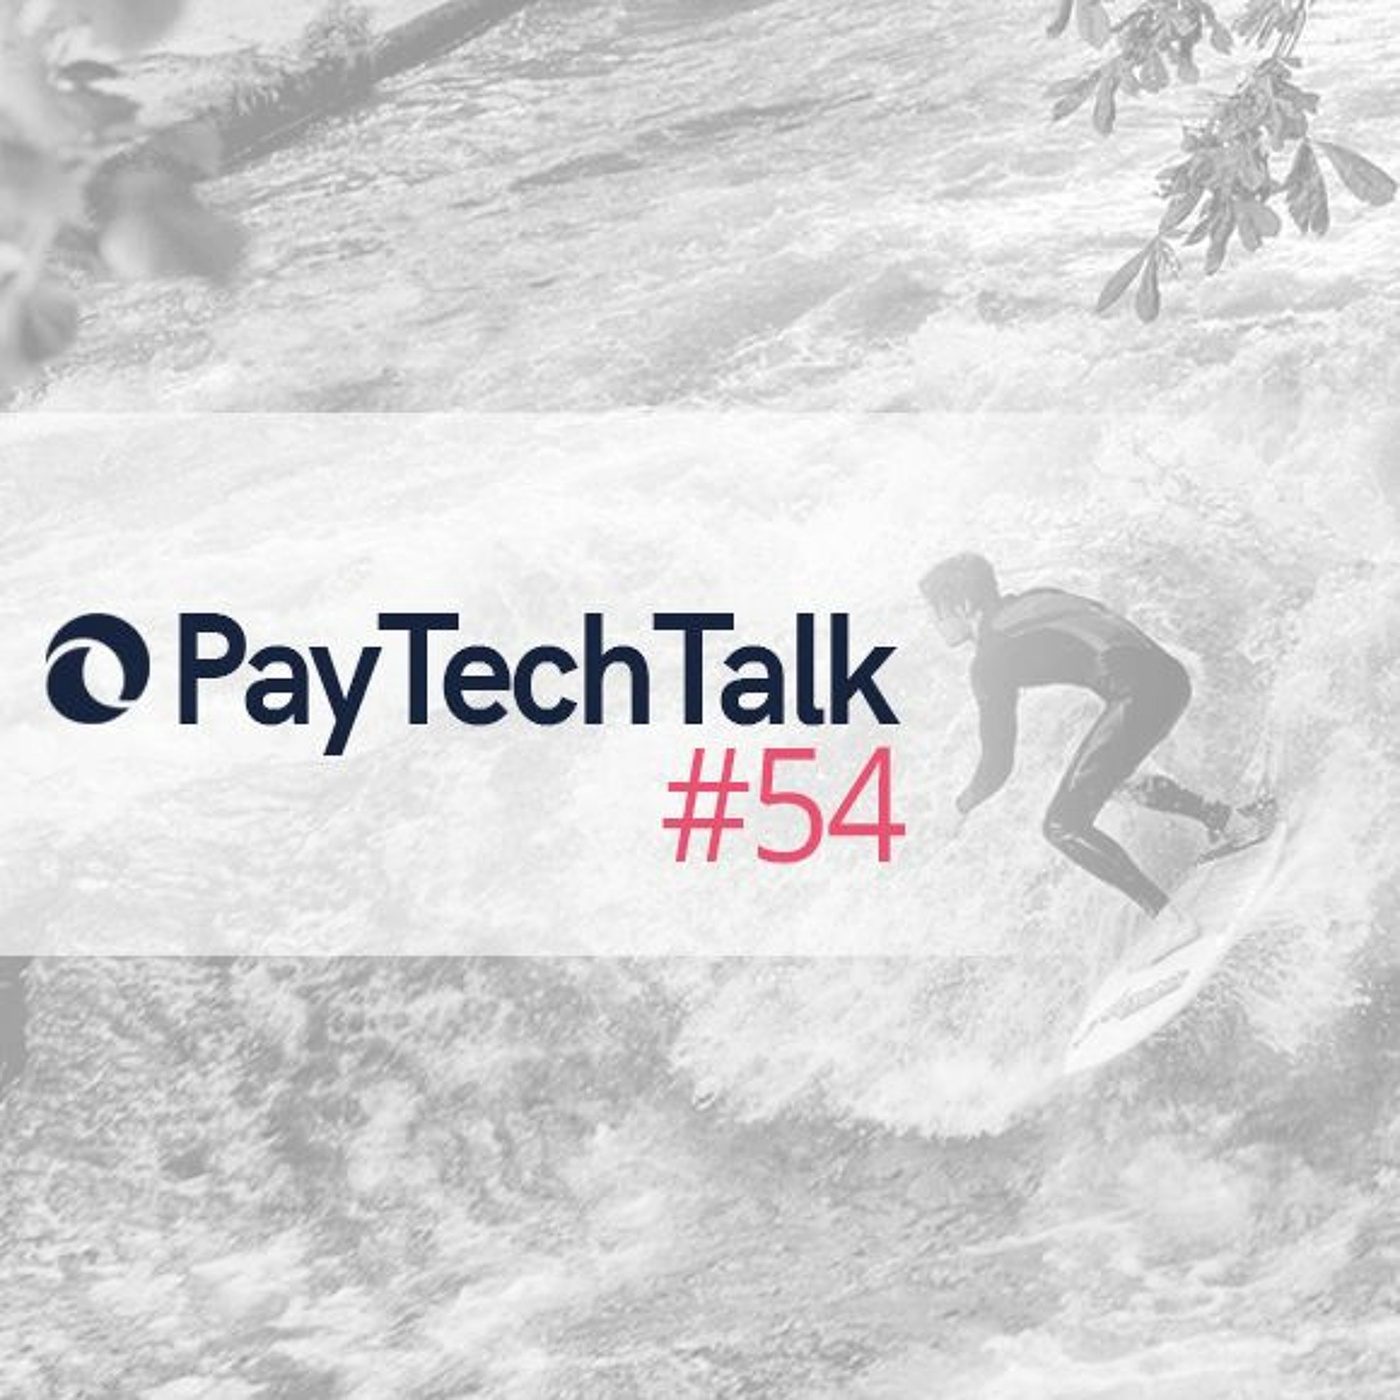 PayTechTalk #54: Blockchain and crypto regulation - from both the UK and the German perspective